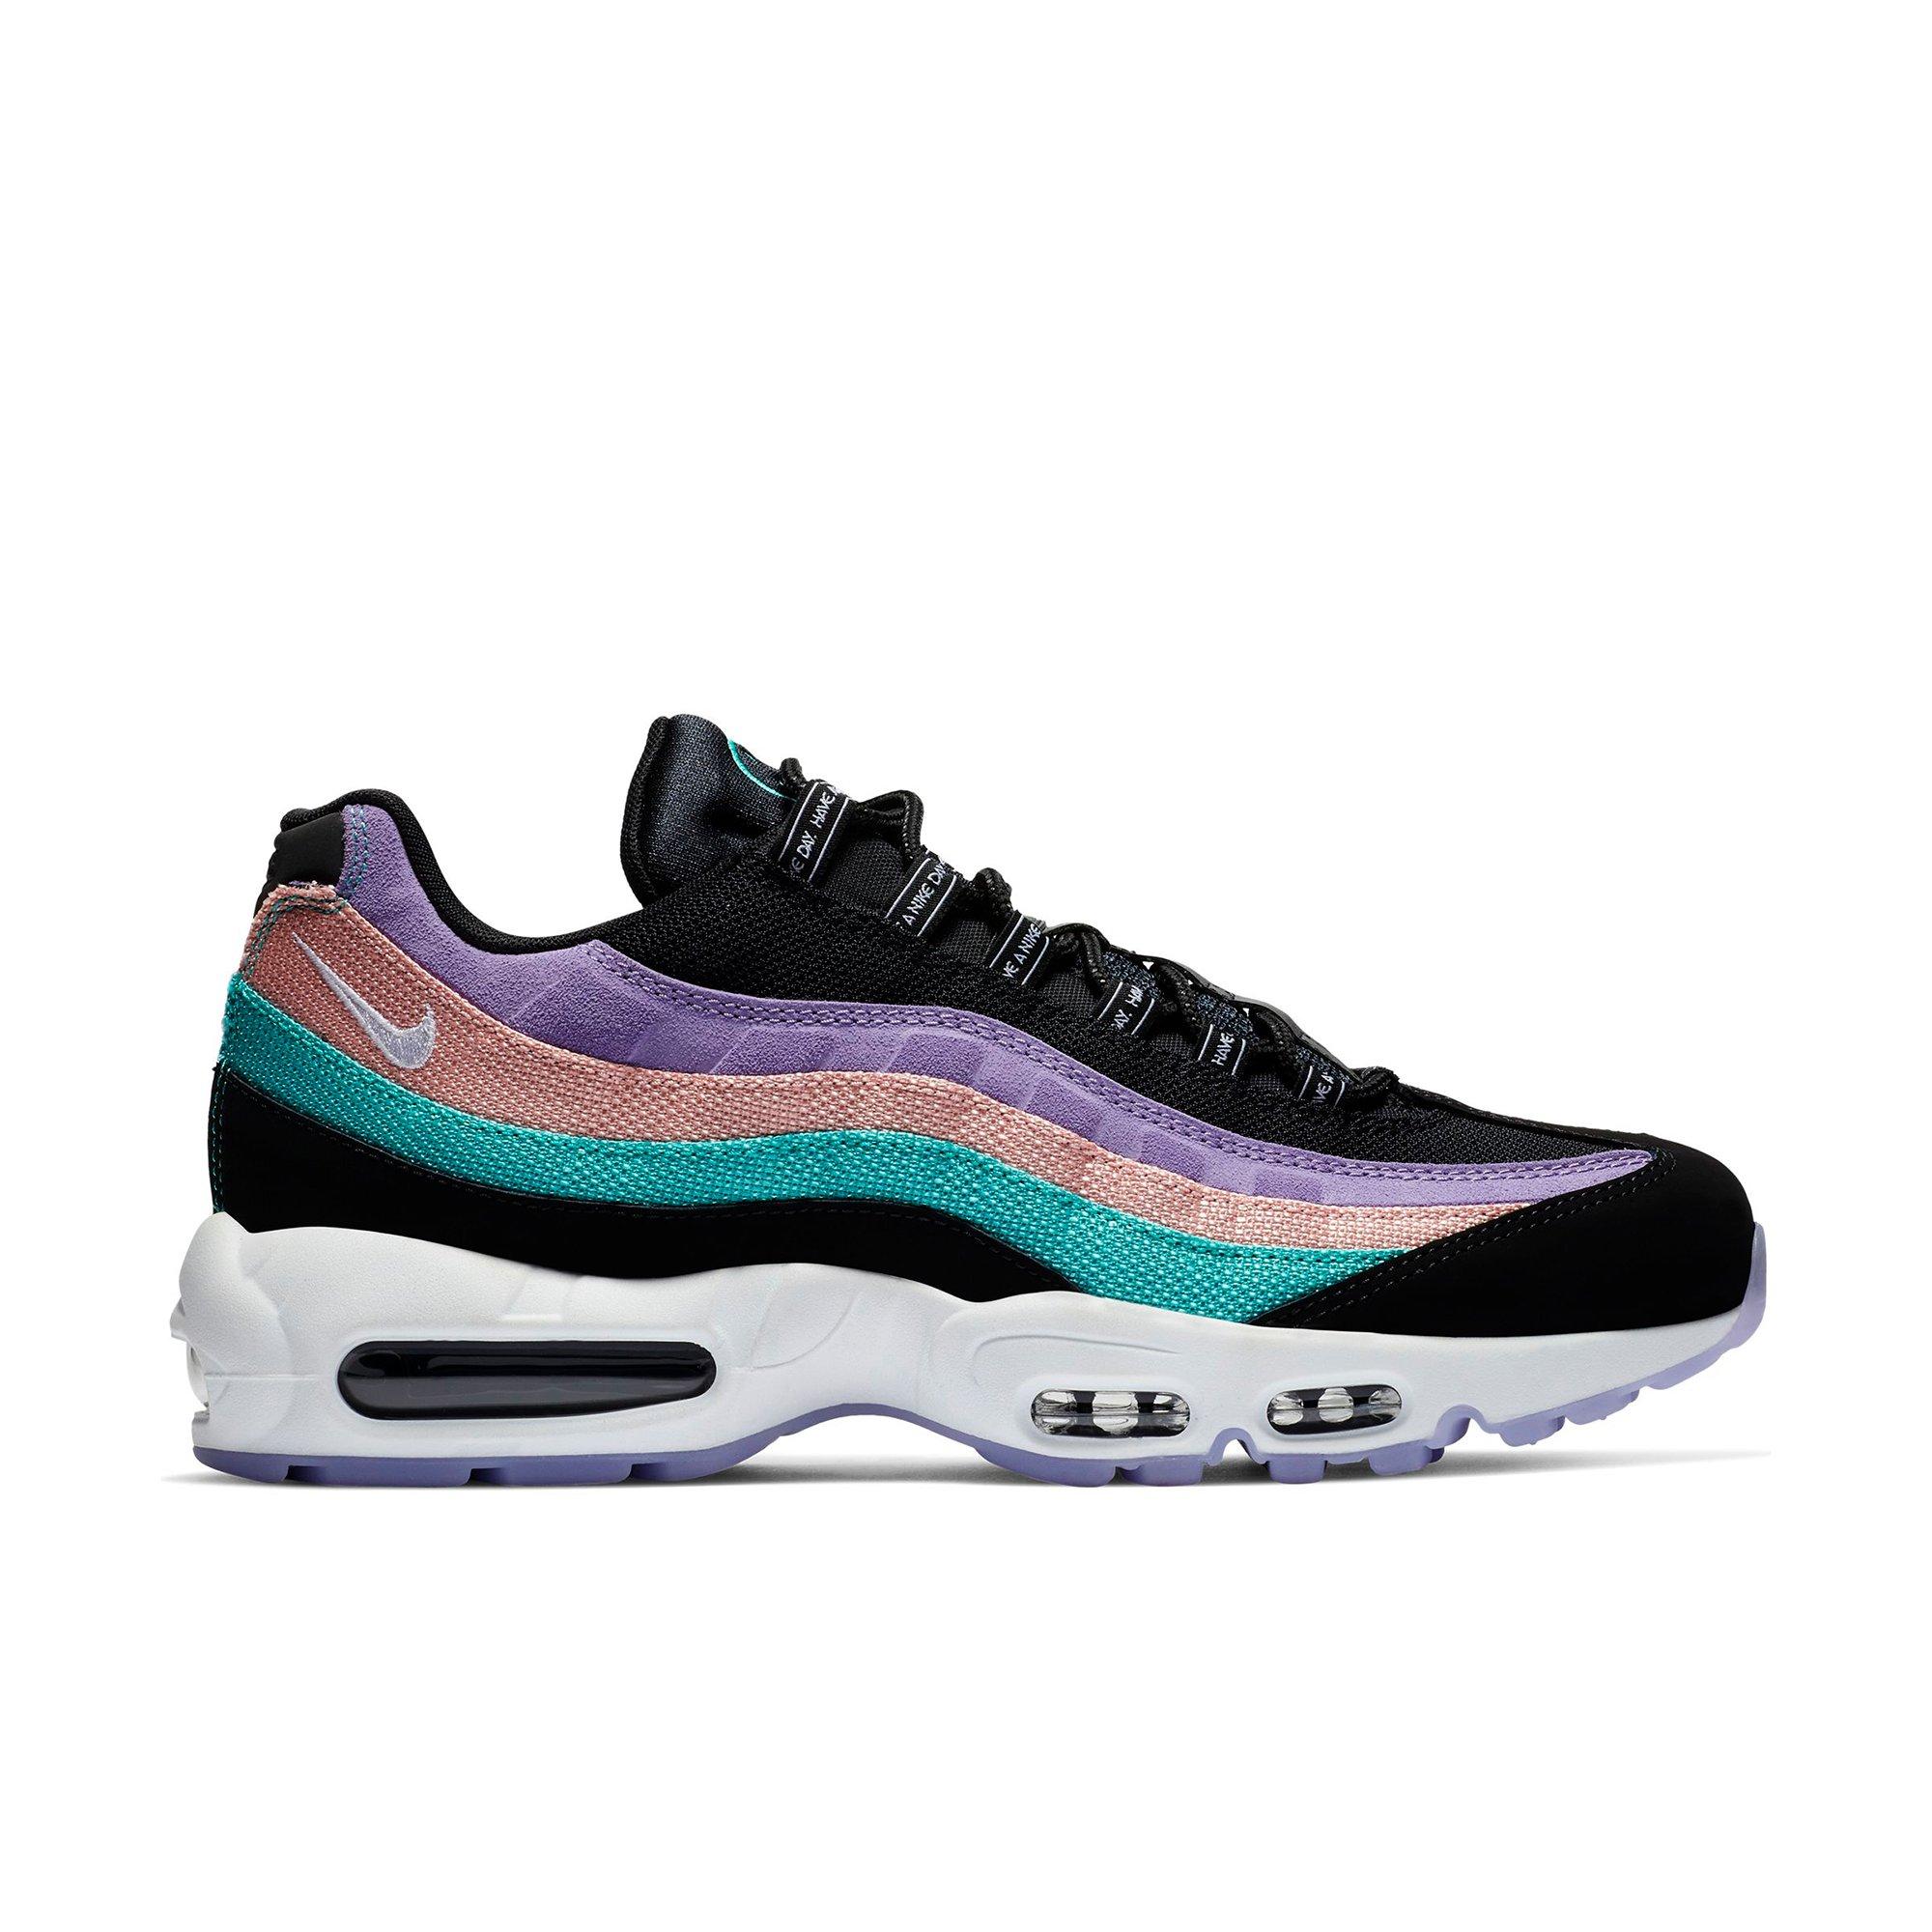 have a nike day air maxes